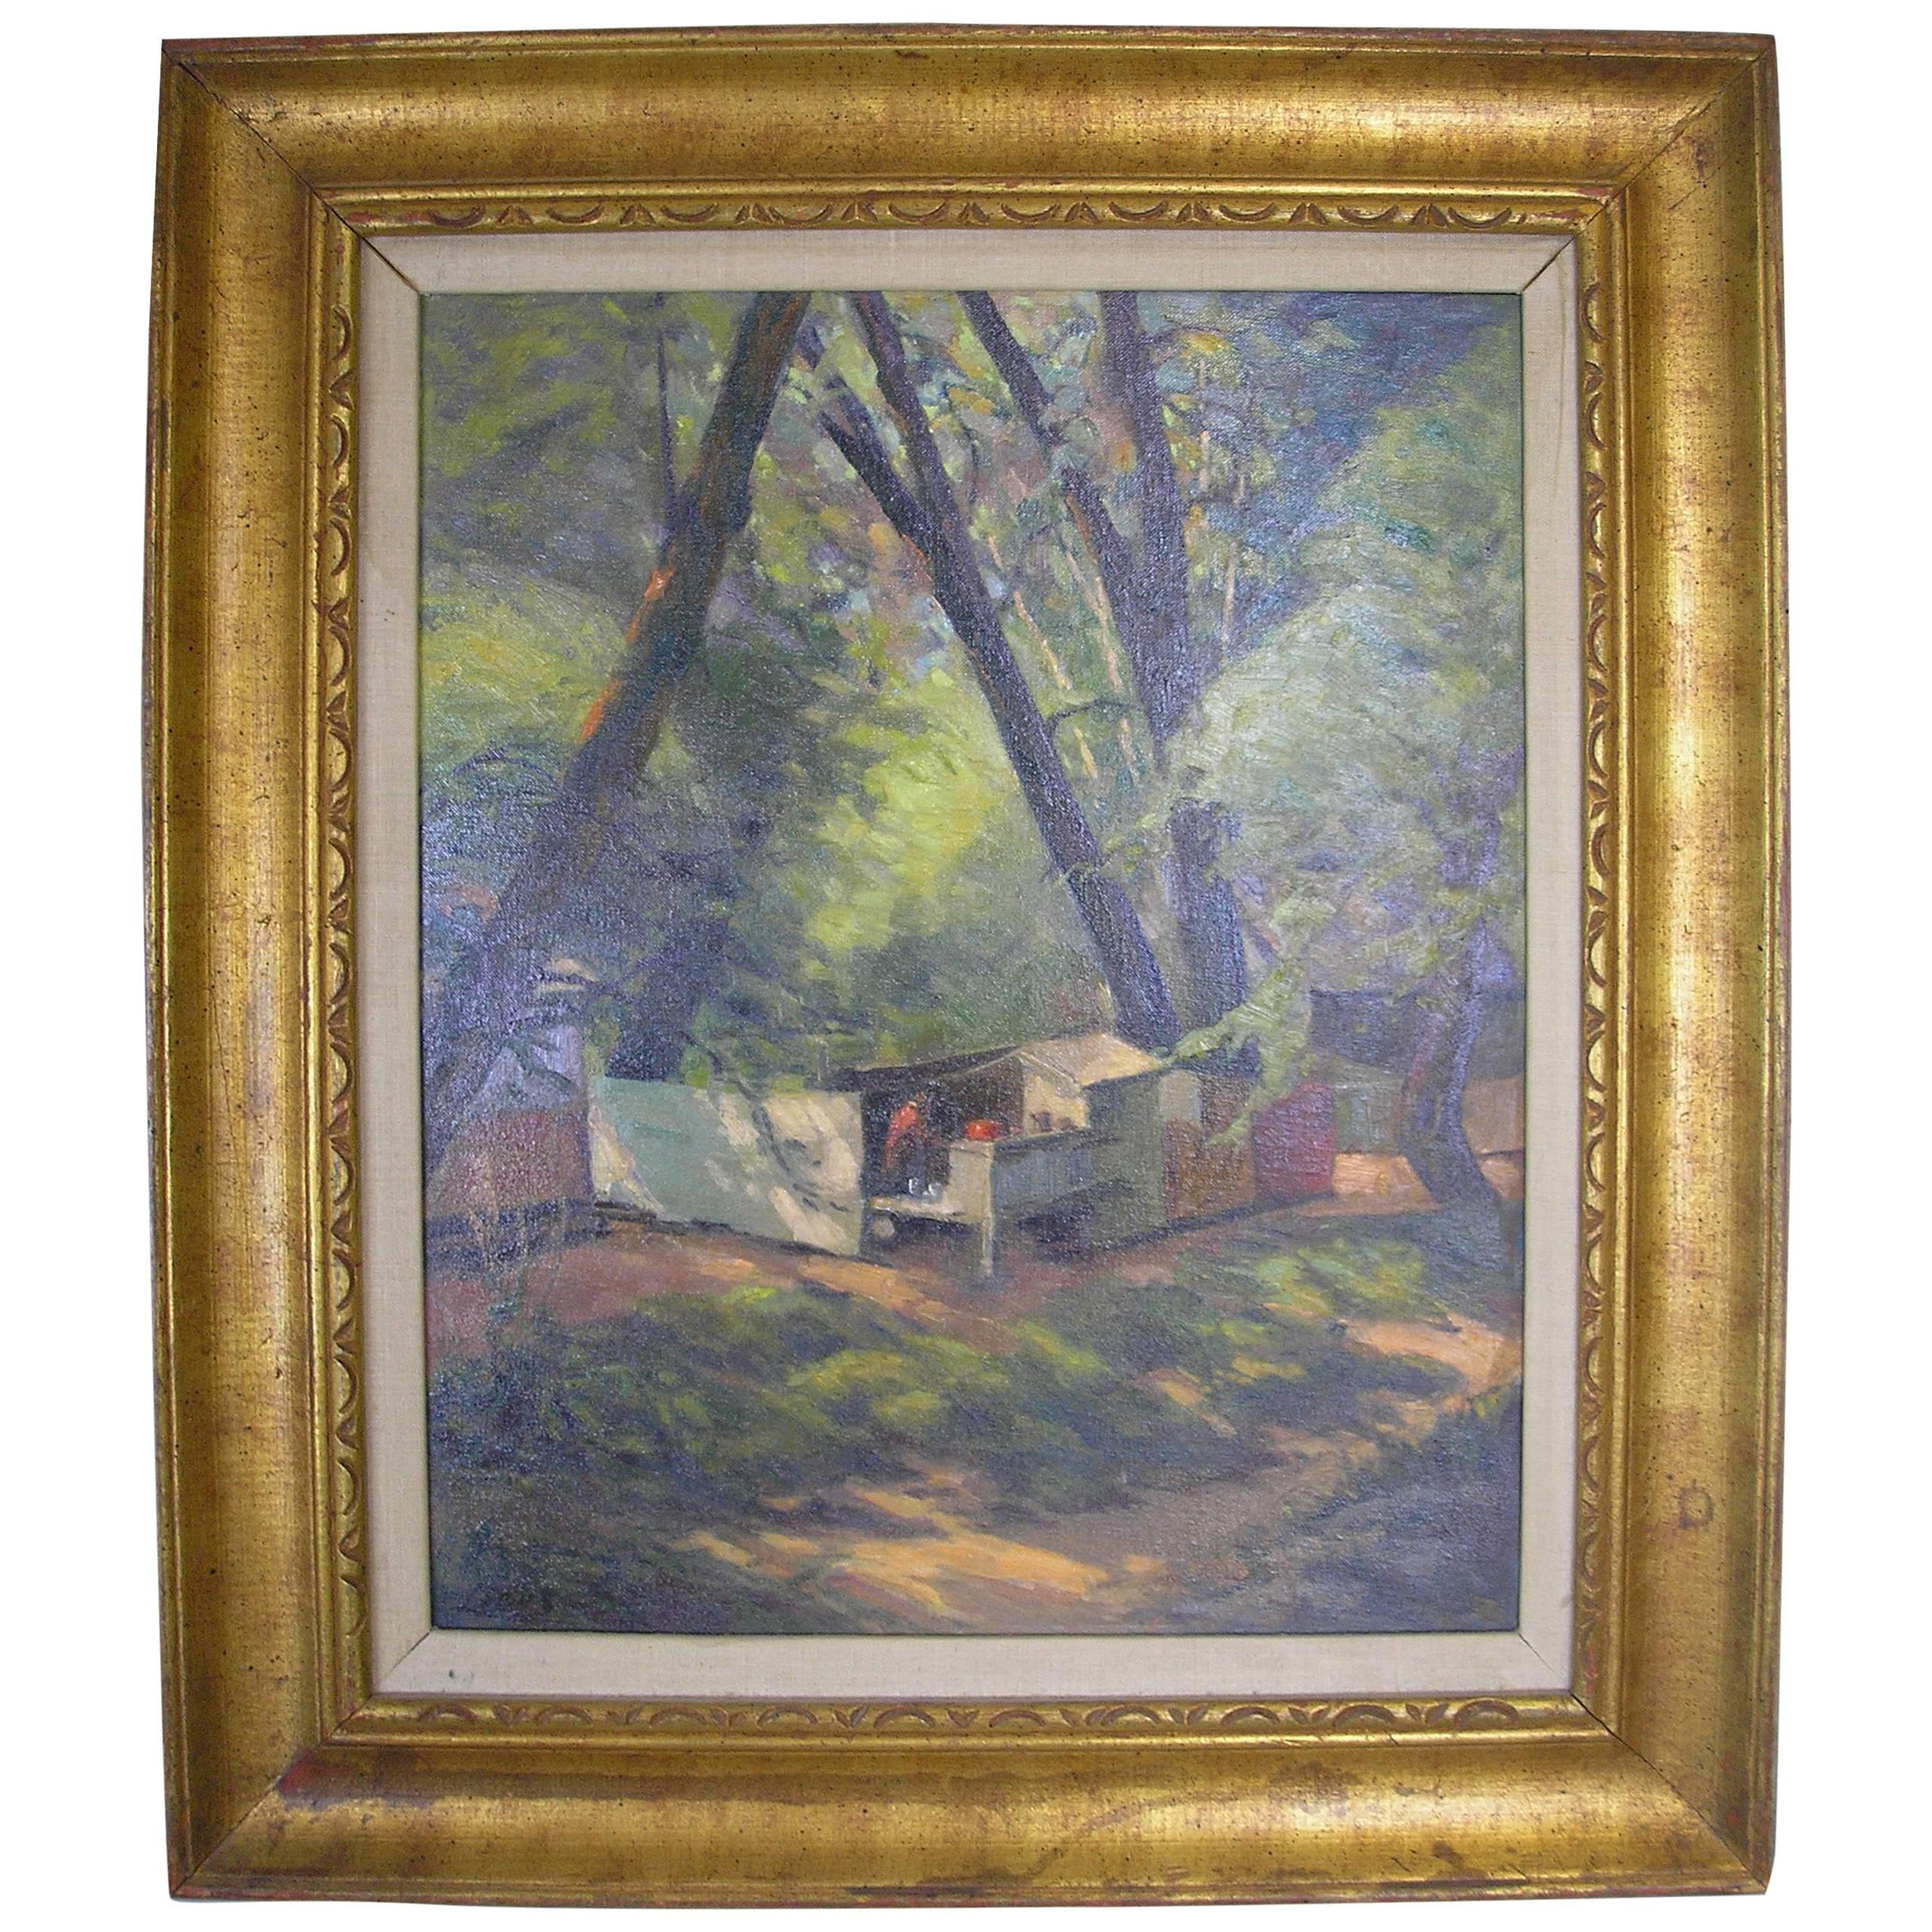 Original Oil Painting by Axel Linus, circa 1950